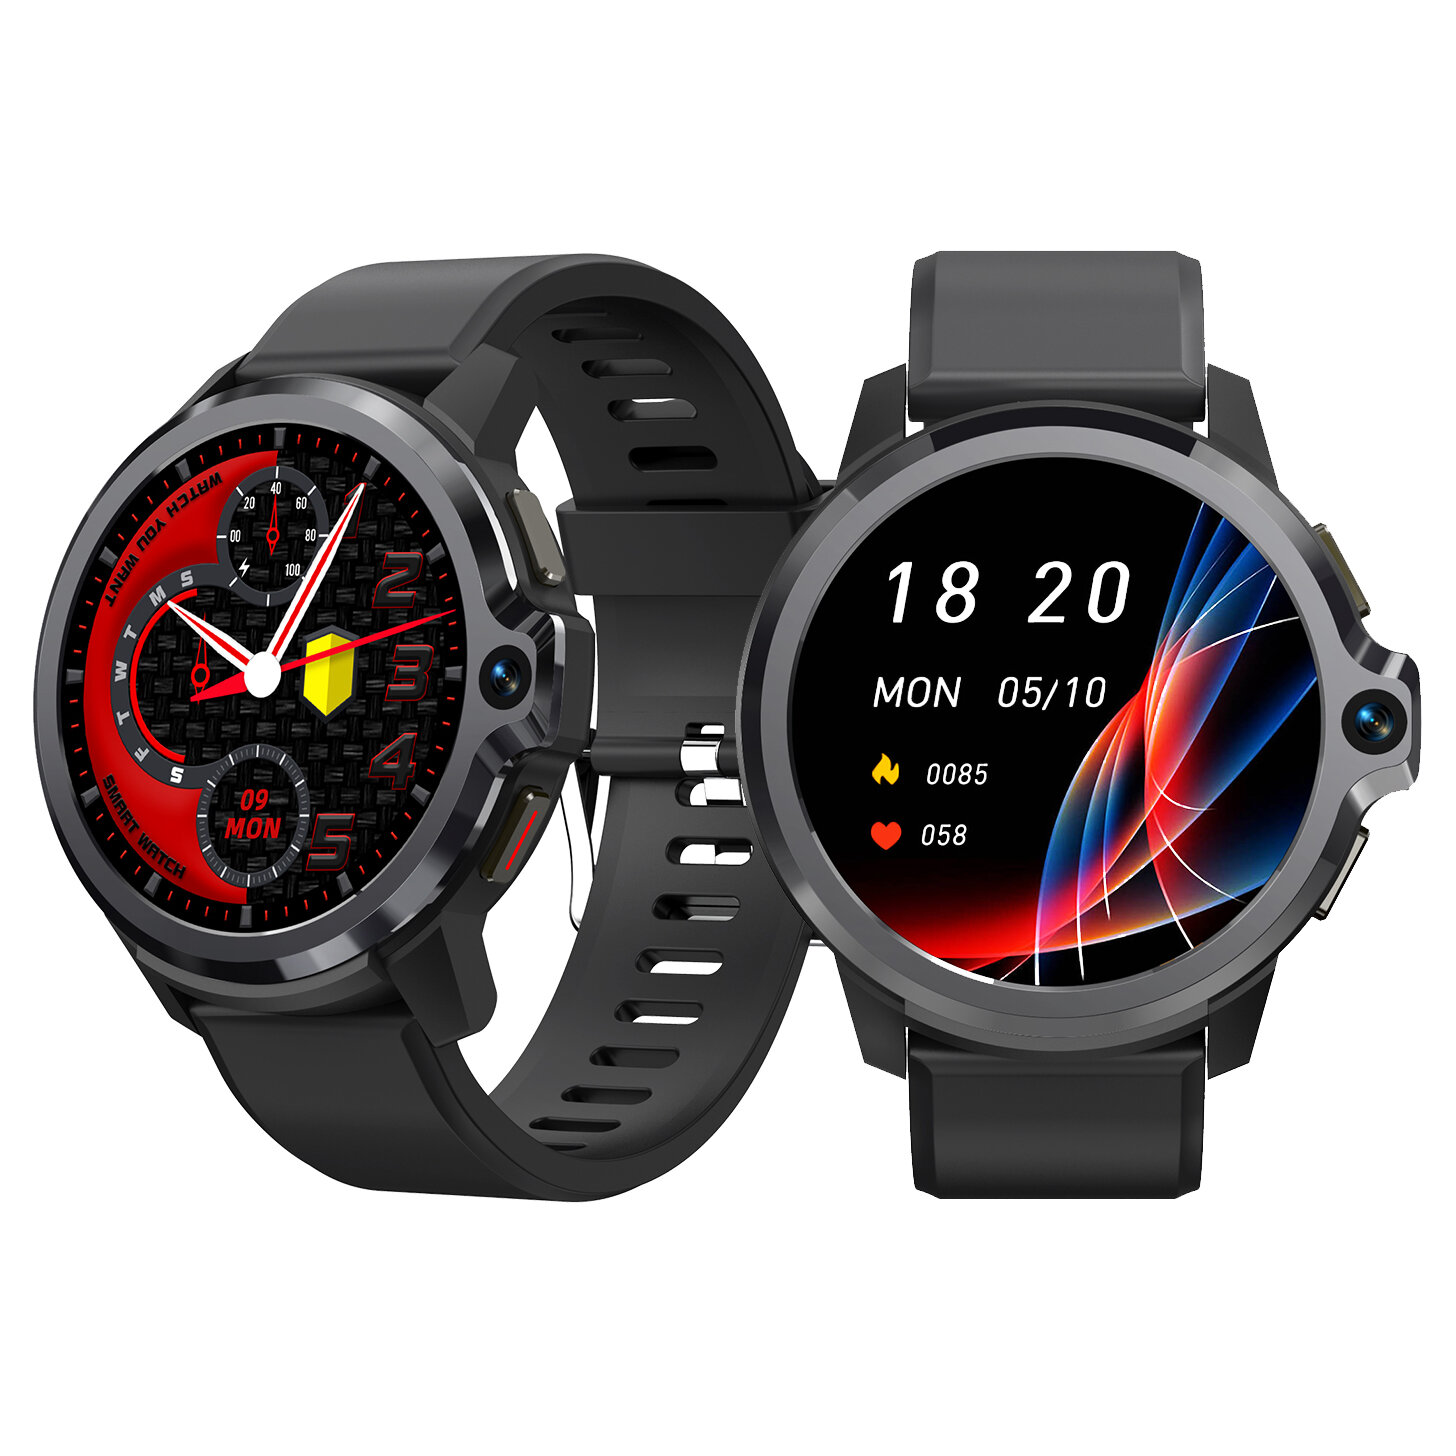 [Dual Chip Dual Mode] KOSPET Prime S 1.6 inch Full Touch Screen Watch Phone Heart Rate Blood Oxygen Monitor Dual Camera